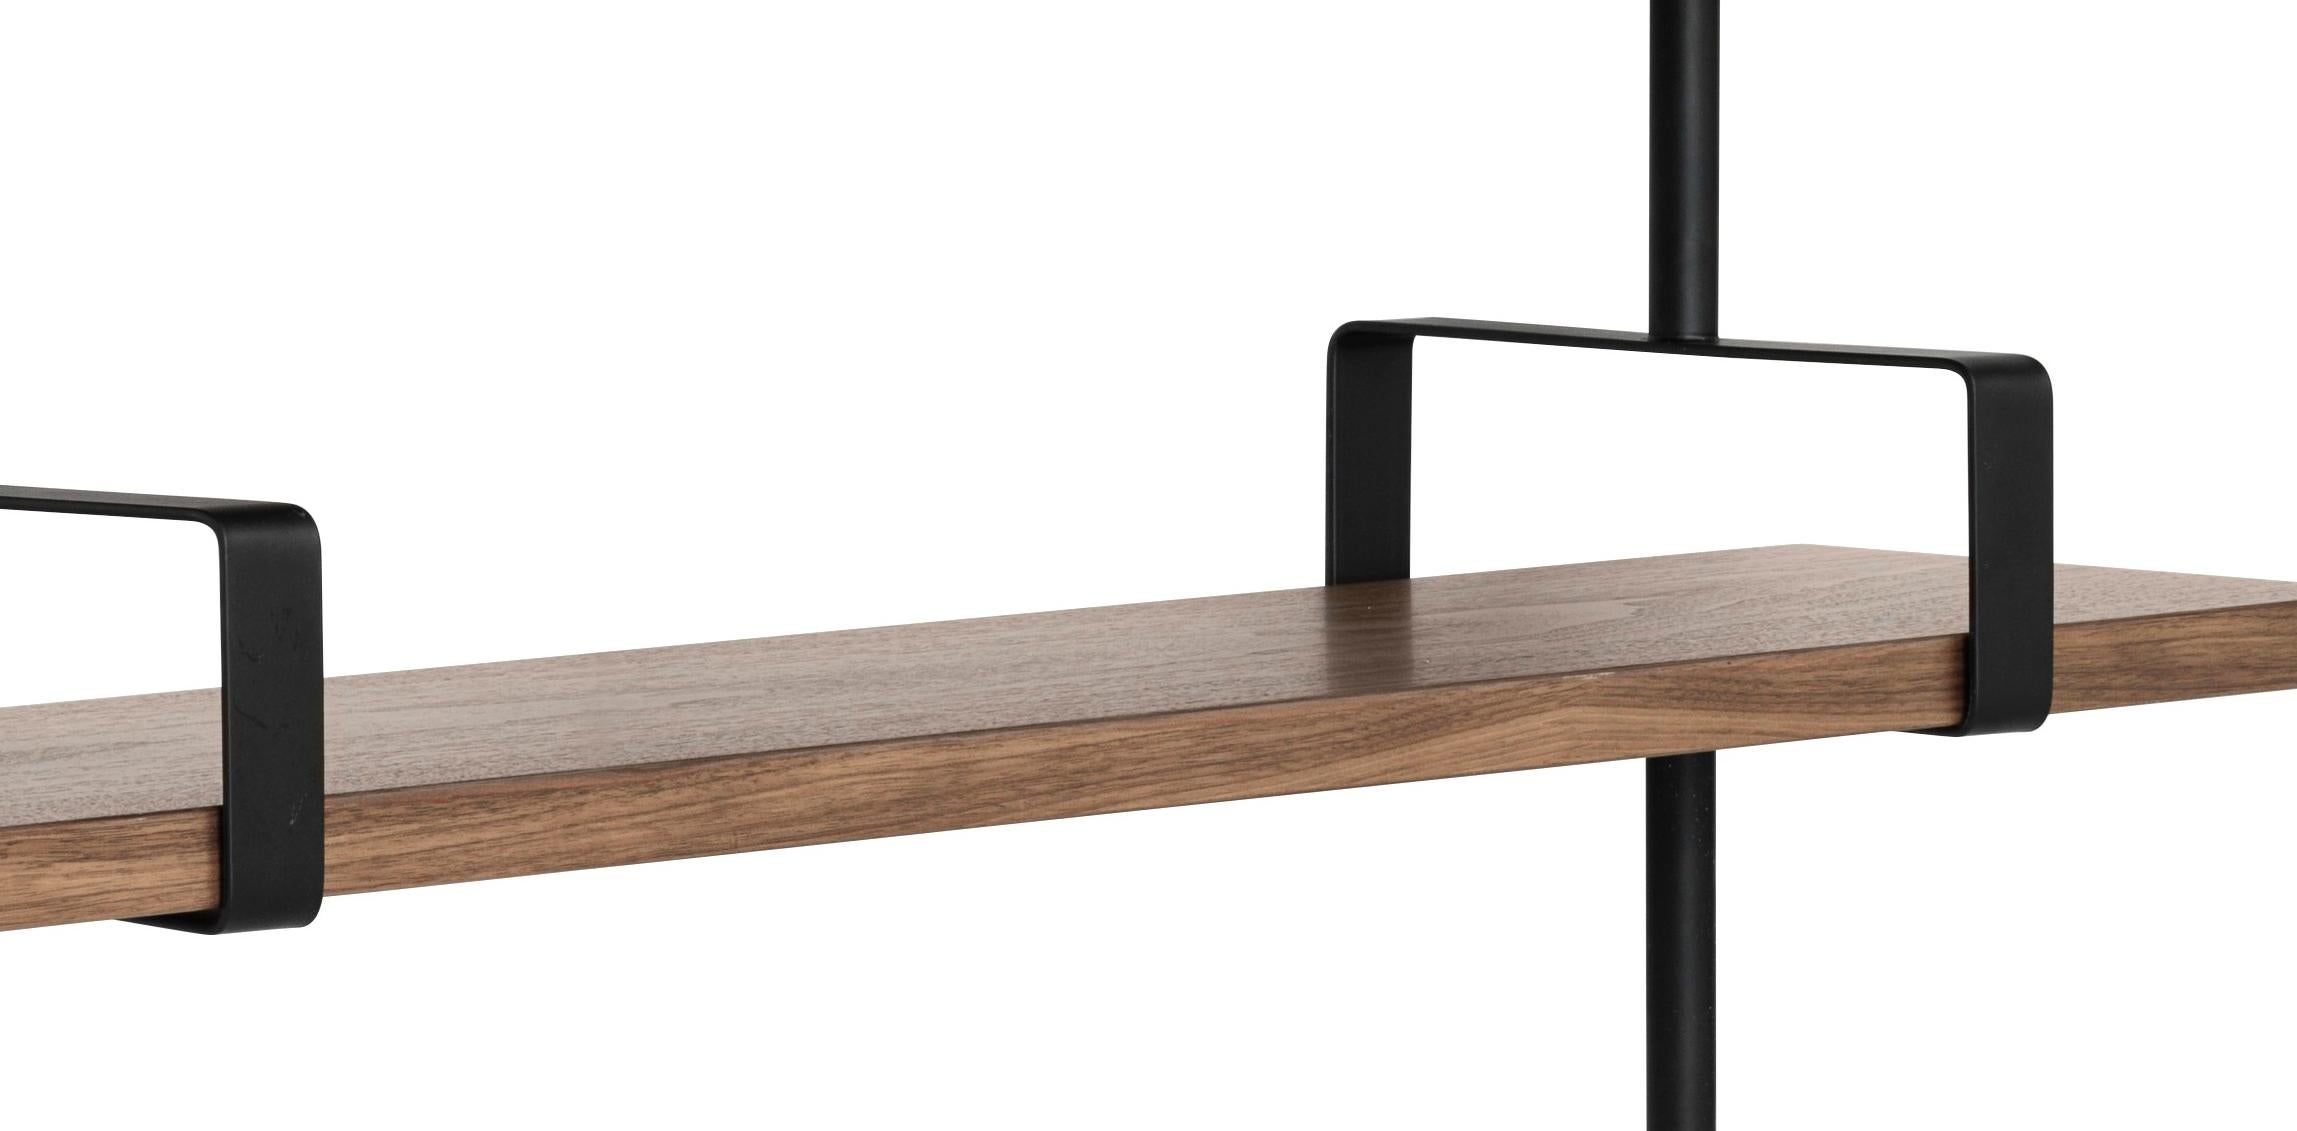 Mathieu Matégot 'Démon' 4-Shelf System for GUBI in Black Stained Ash In New Condition For Sale In Glendale, CA